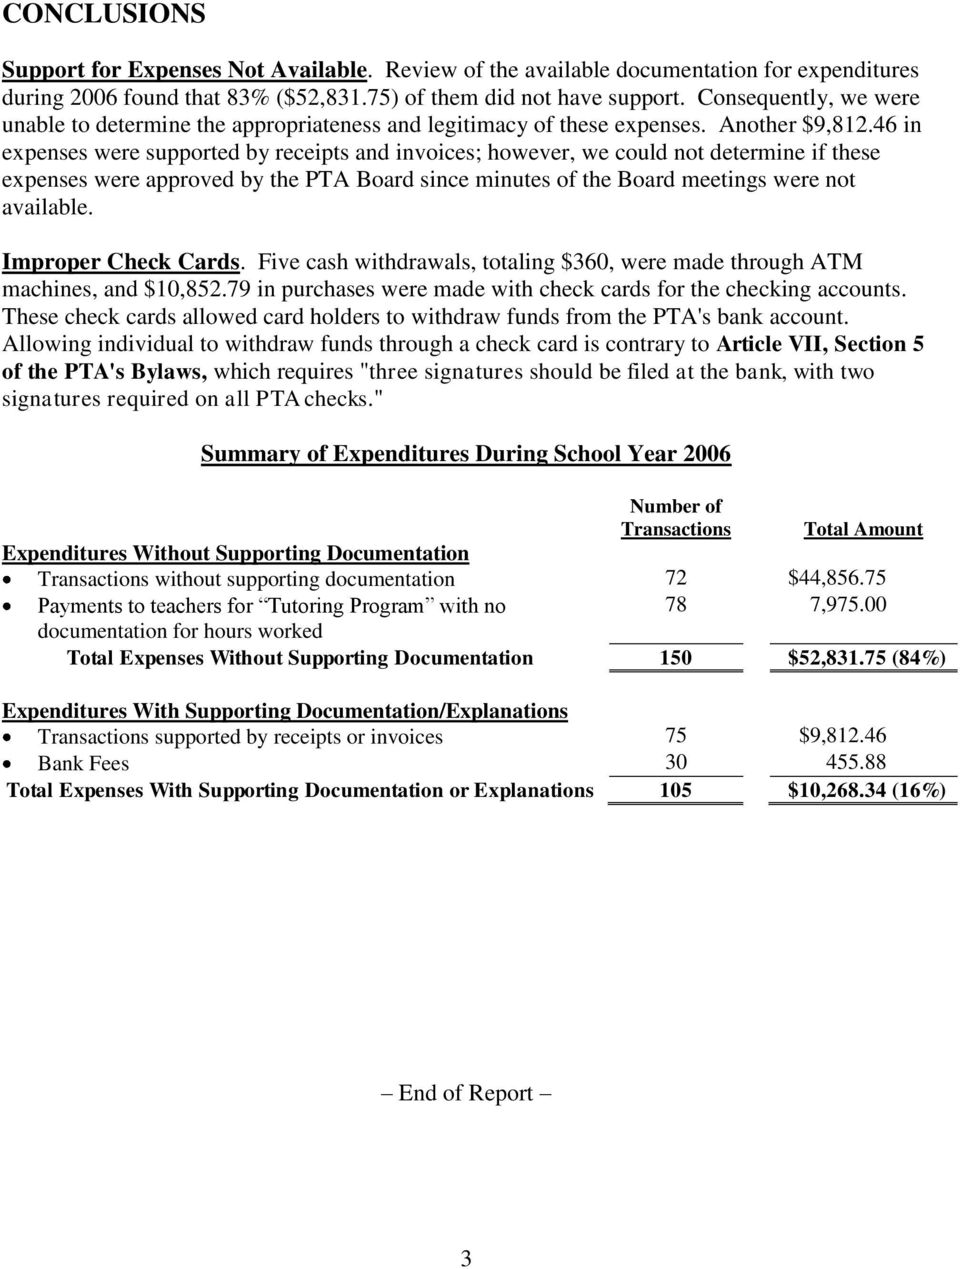 46 in expenses were supported by receipts and invoices; however, we could not determine if these expenses were approved by the PTA Board since minutes of the Board meetings were not available.